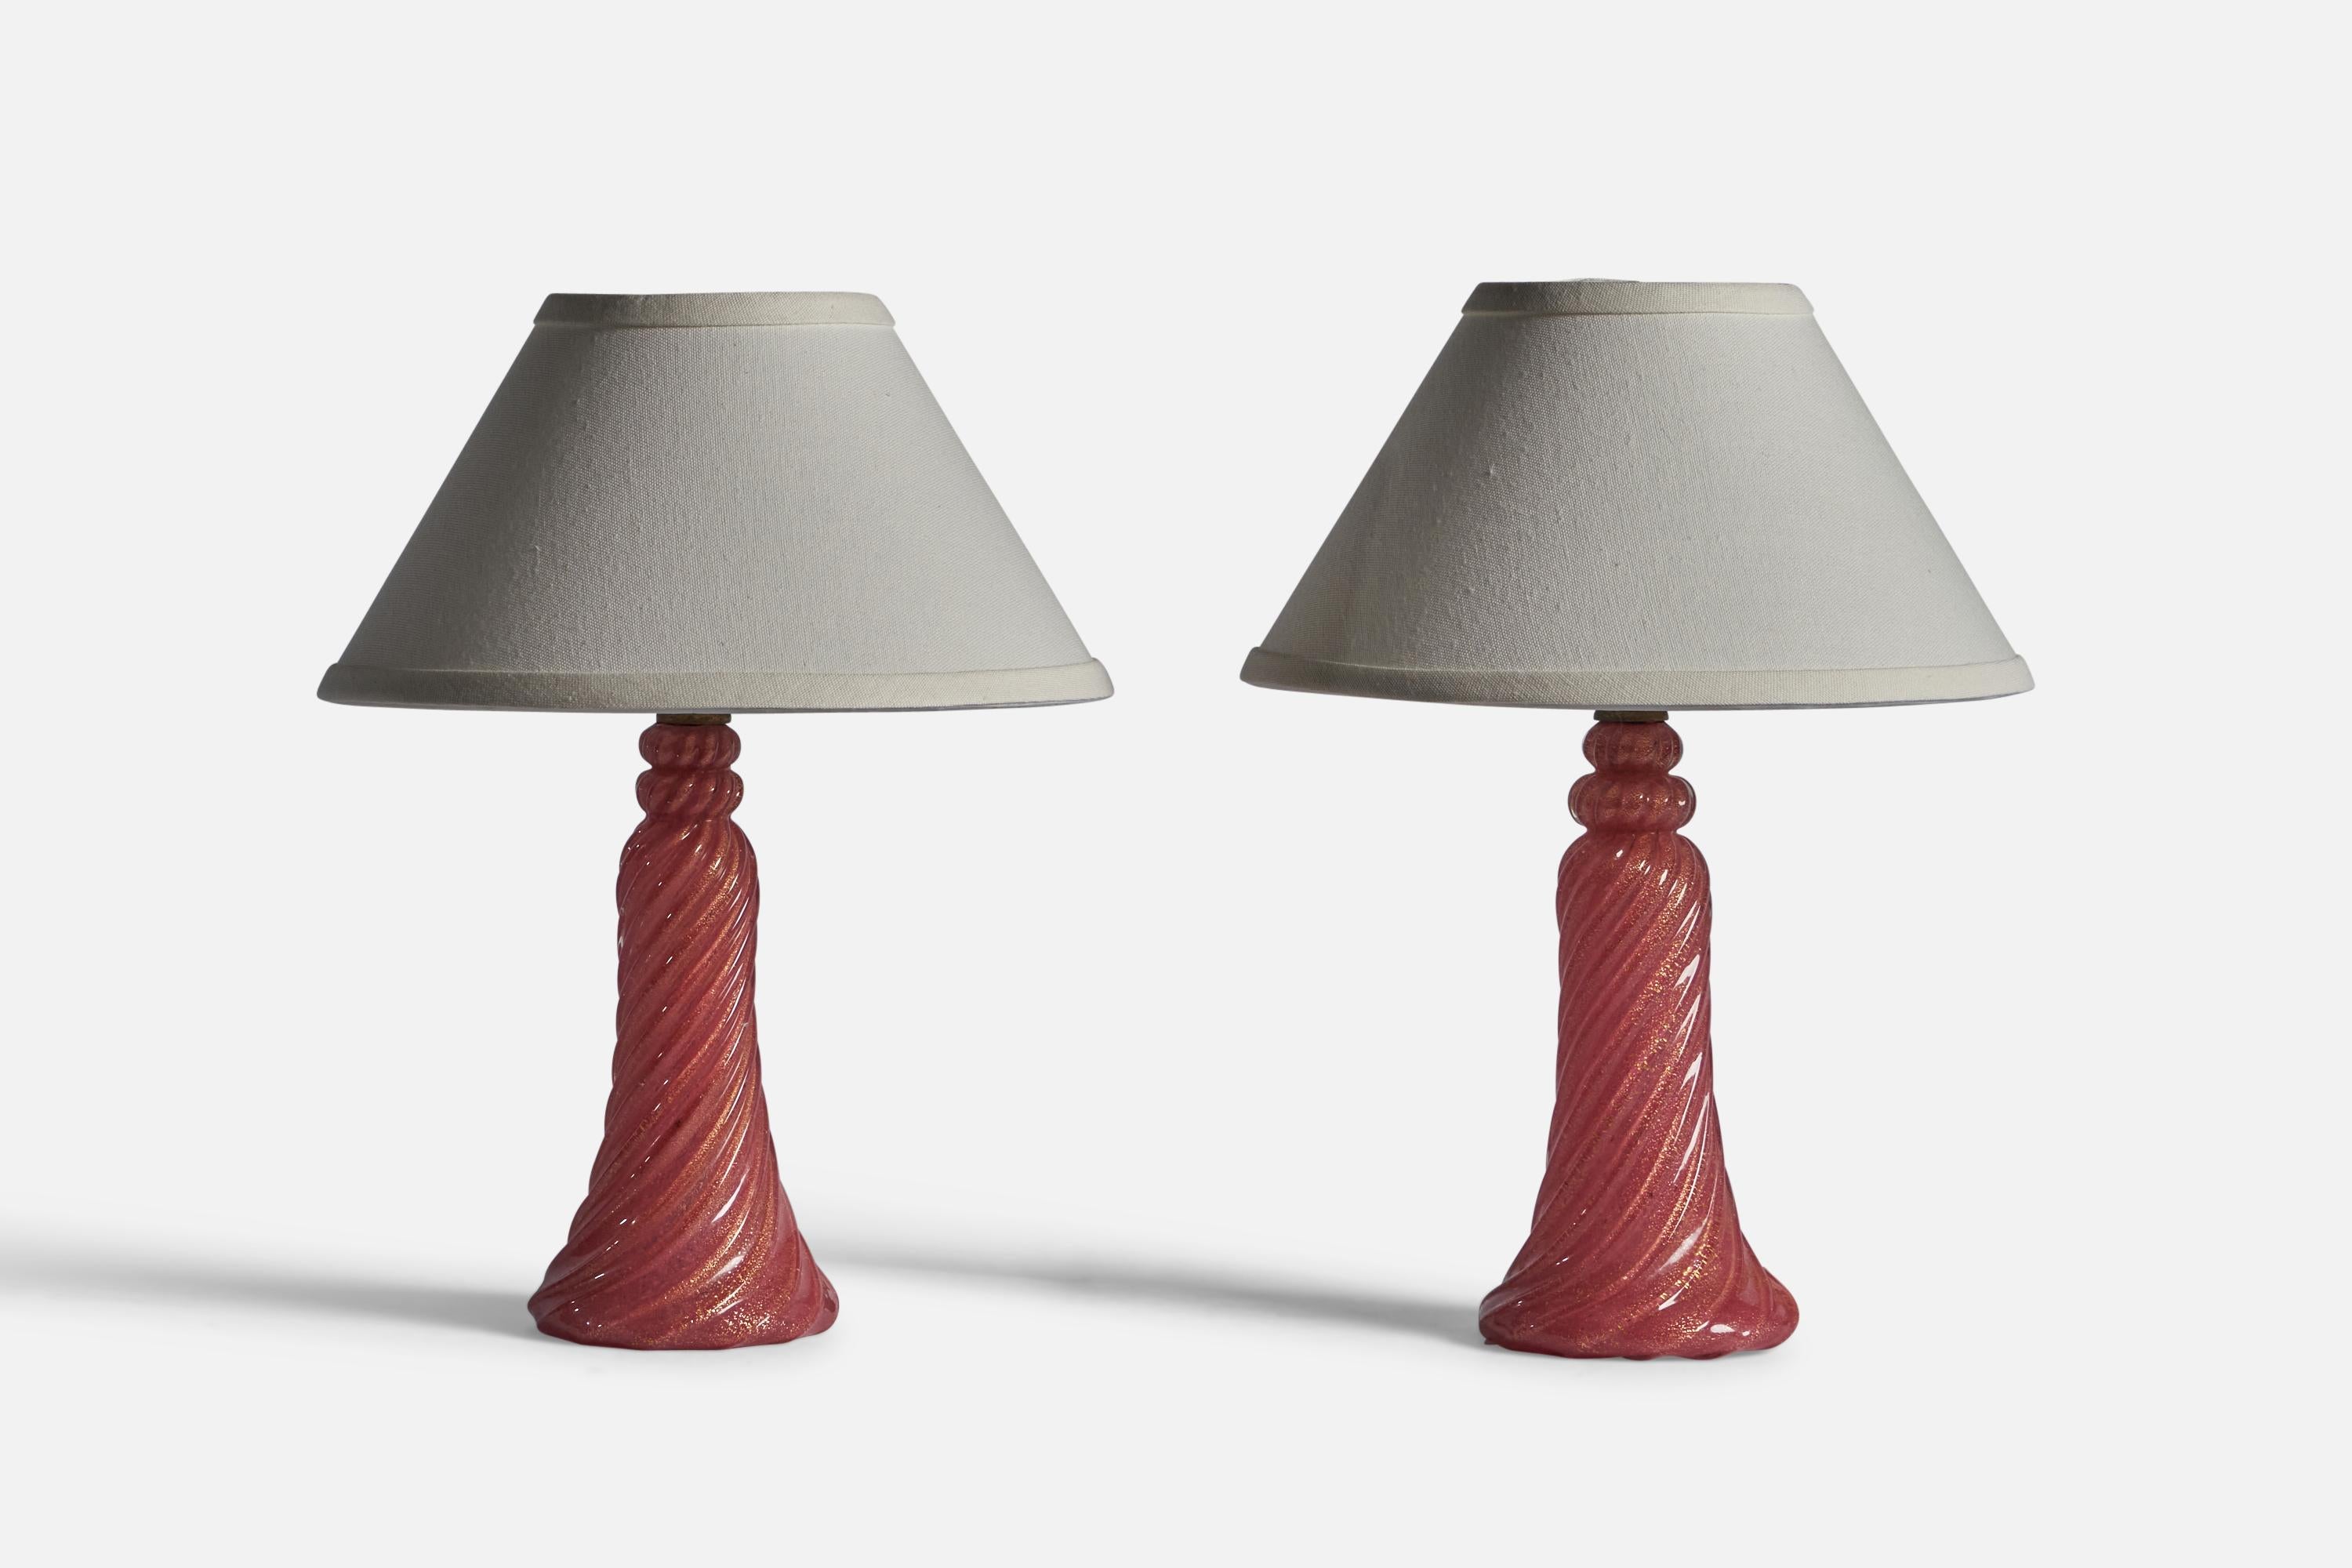 A pair of pink glass and brass table lamps, designed and produced in Murano, Italy, c. 1940s.

Dimensions of Lamp (inches): 14